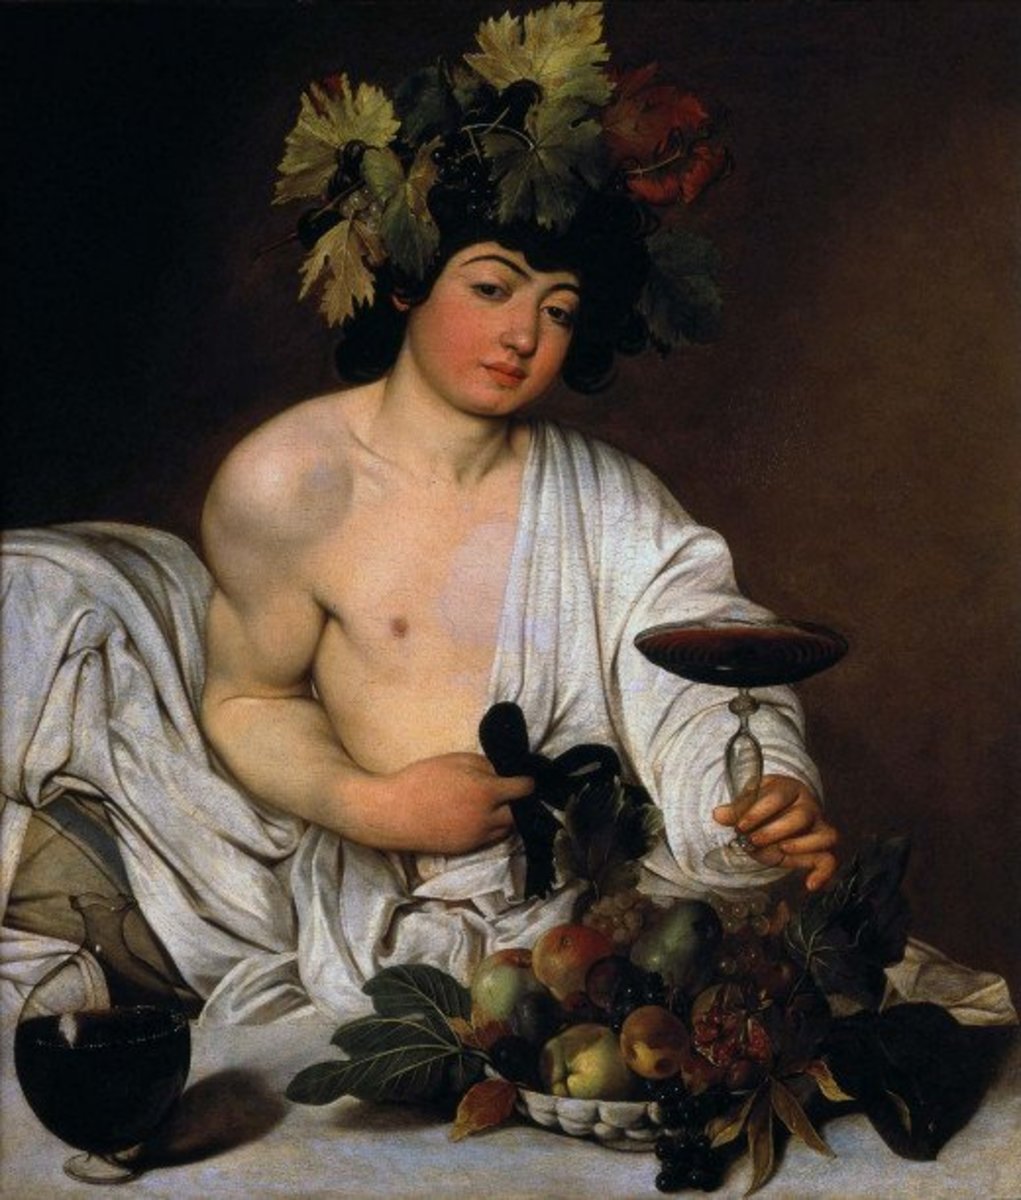 dionysusgod-of-wine-and-revelries